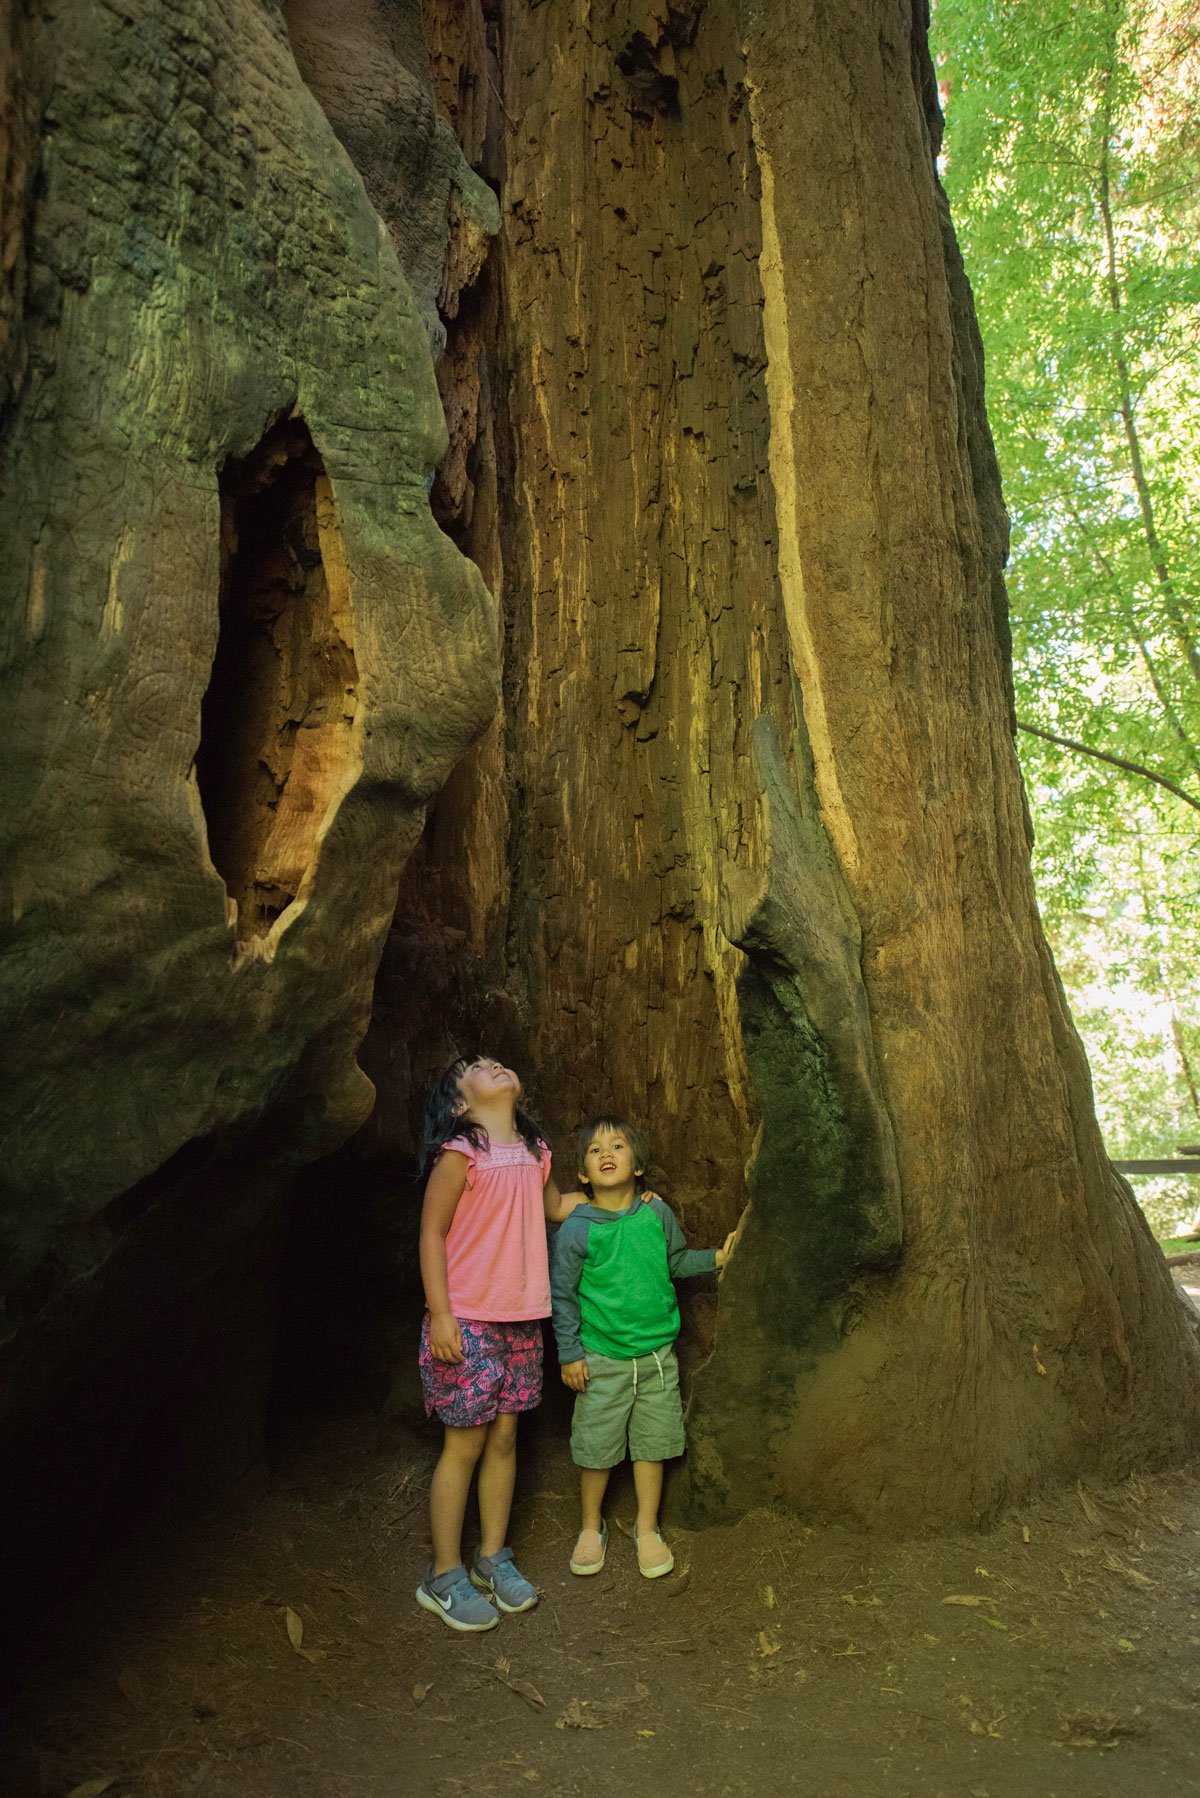 Two small children, a young boy and an adolescent girl, stand at the trunk of a redwood and look up in awe.